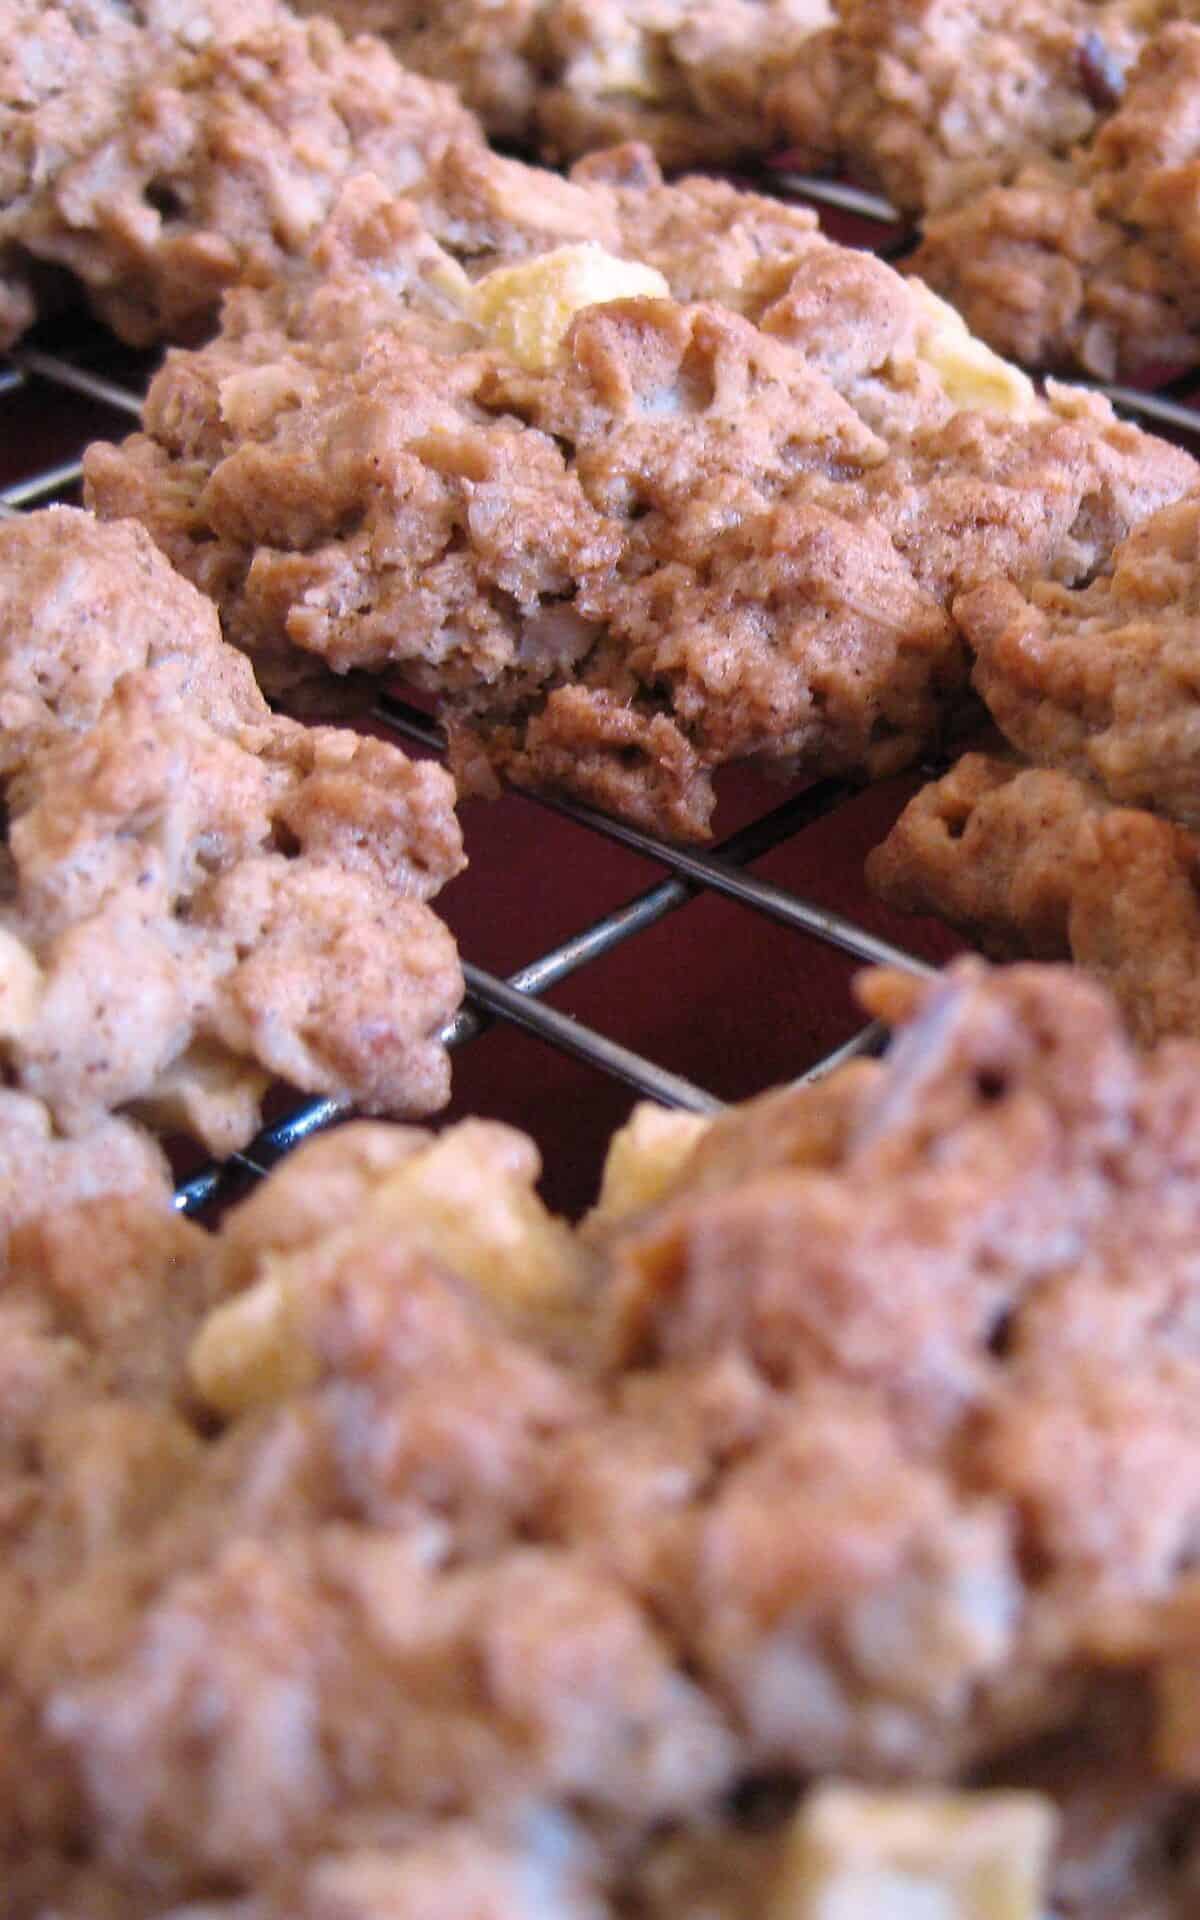  These cookies are so easy to make, you'll wonder why you haven't tried them before.